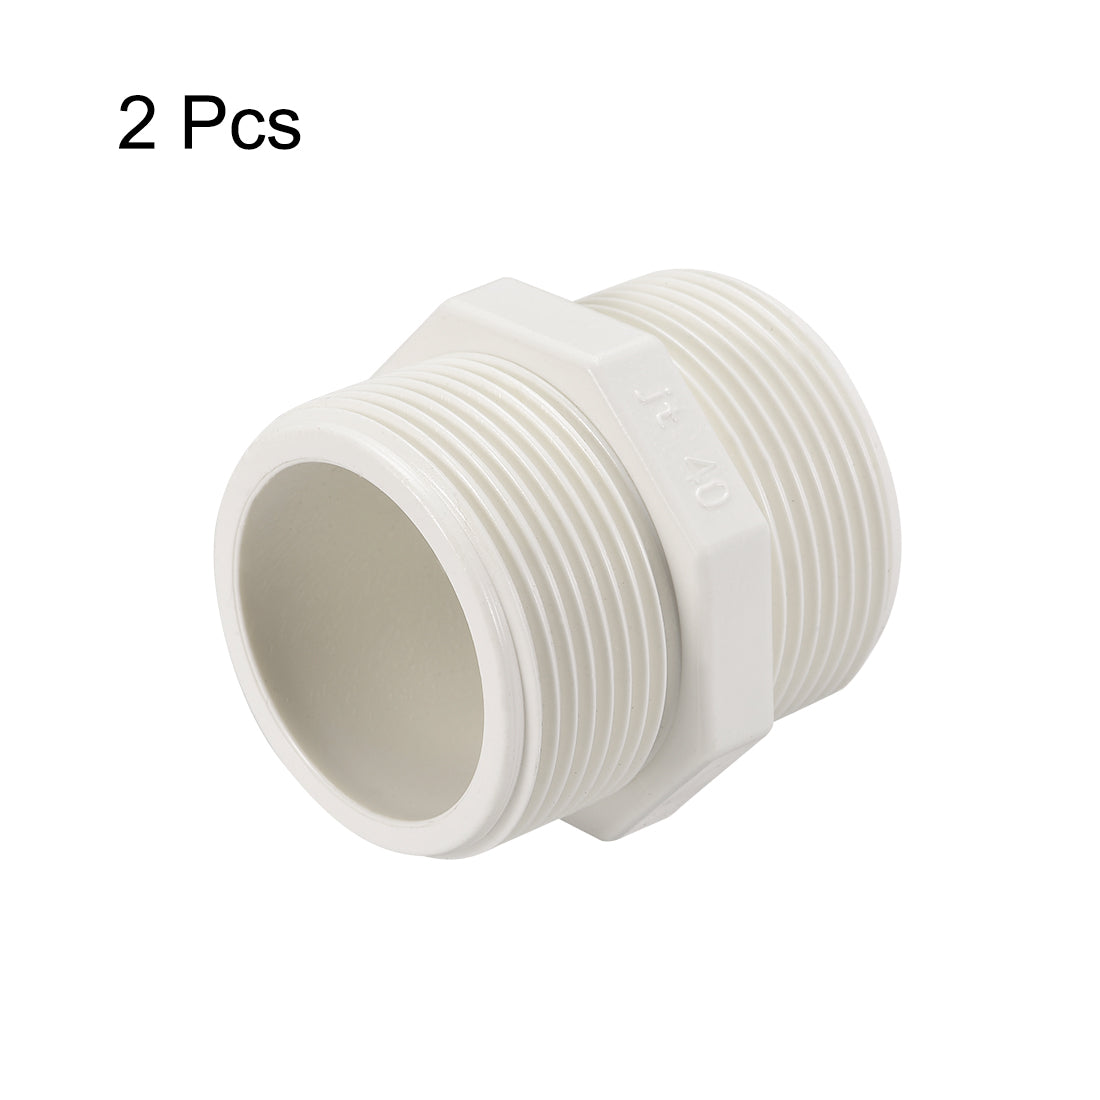 uxcell Uxcell PVC Pipe Fitting Hex Nipple G1-1/4 x G1-1/4 Male Thread Adapter Connector 2pcs